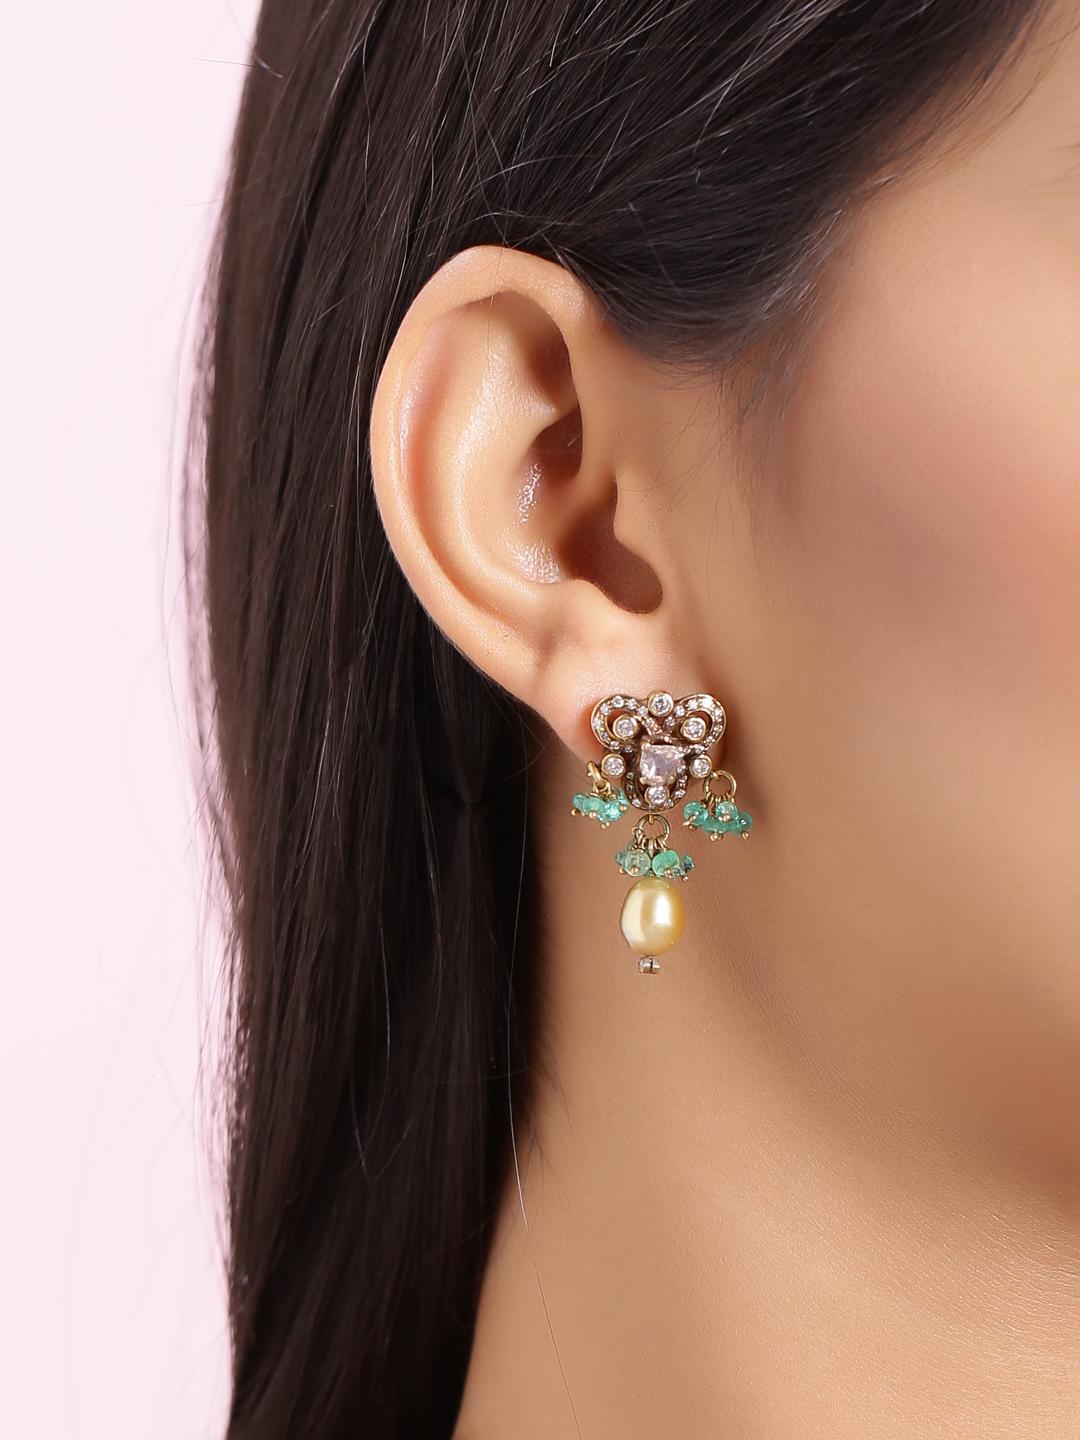 Round Cut Victorian Style Earring with Diamonds Emerald Beads and Pearl in Gold For Sale